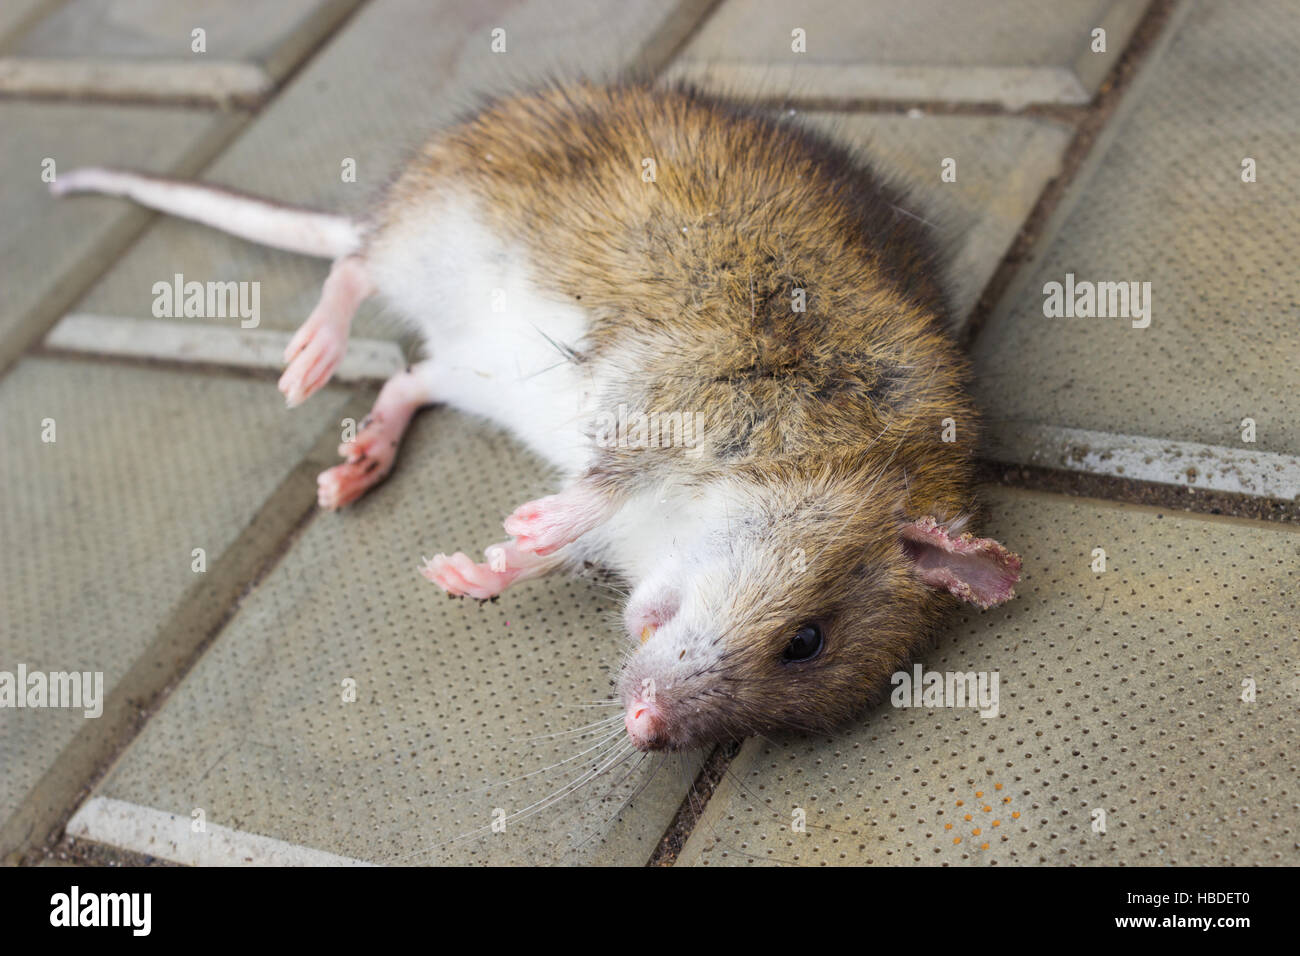 A poisoned rat Stock Photo